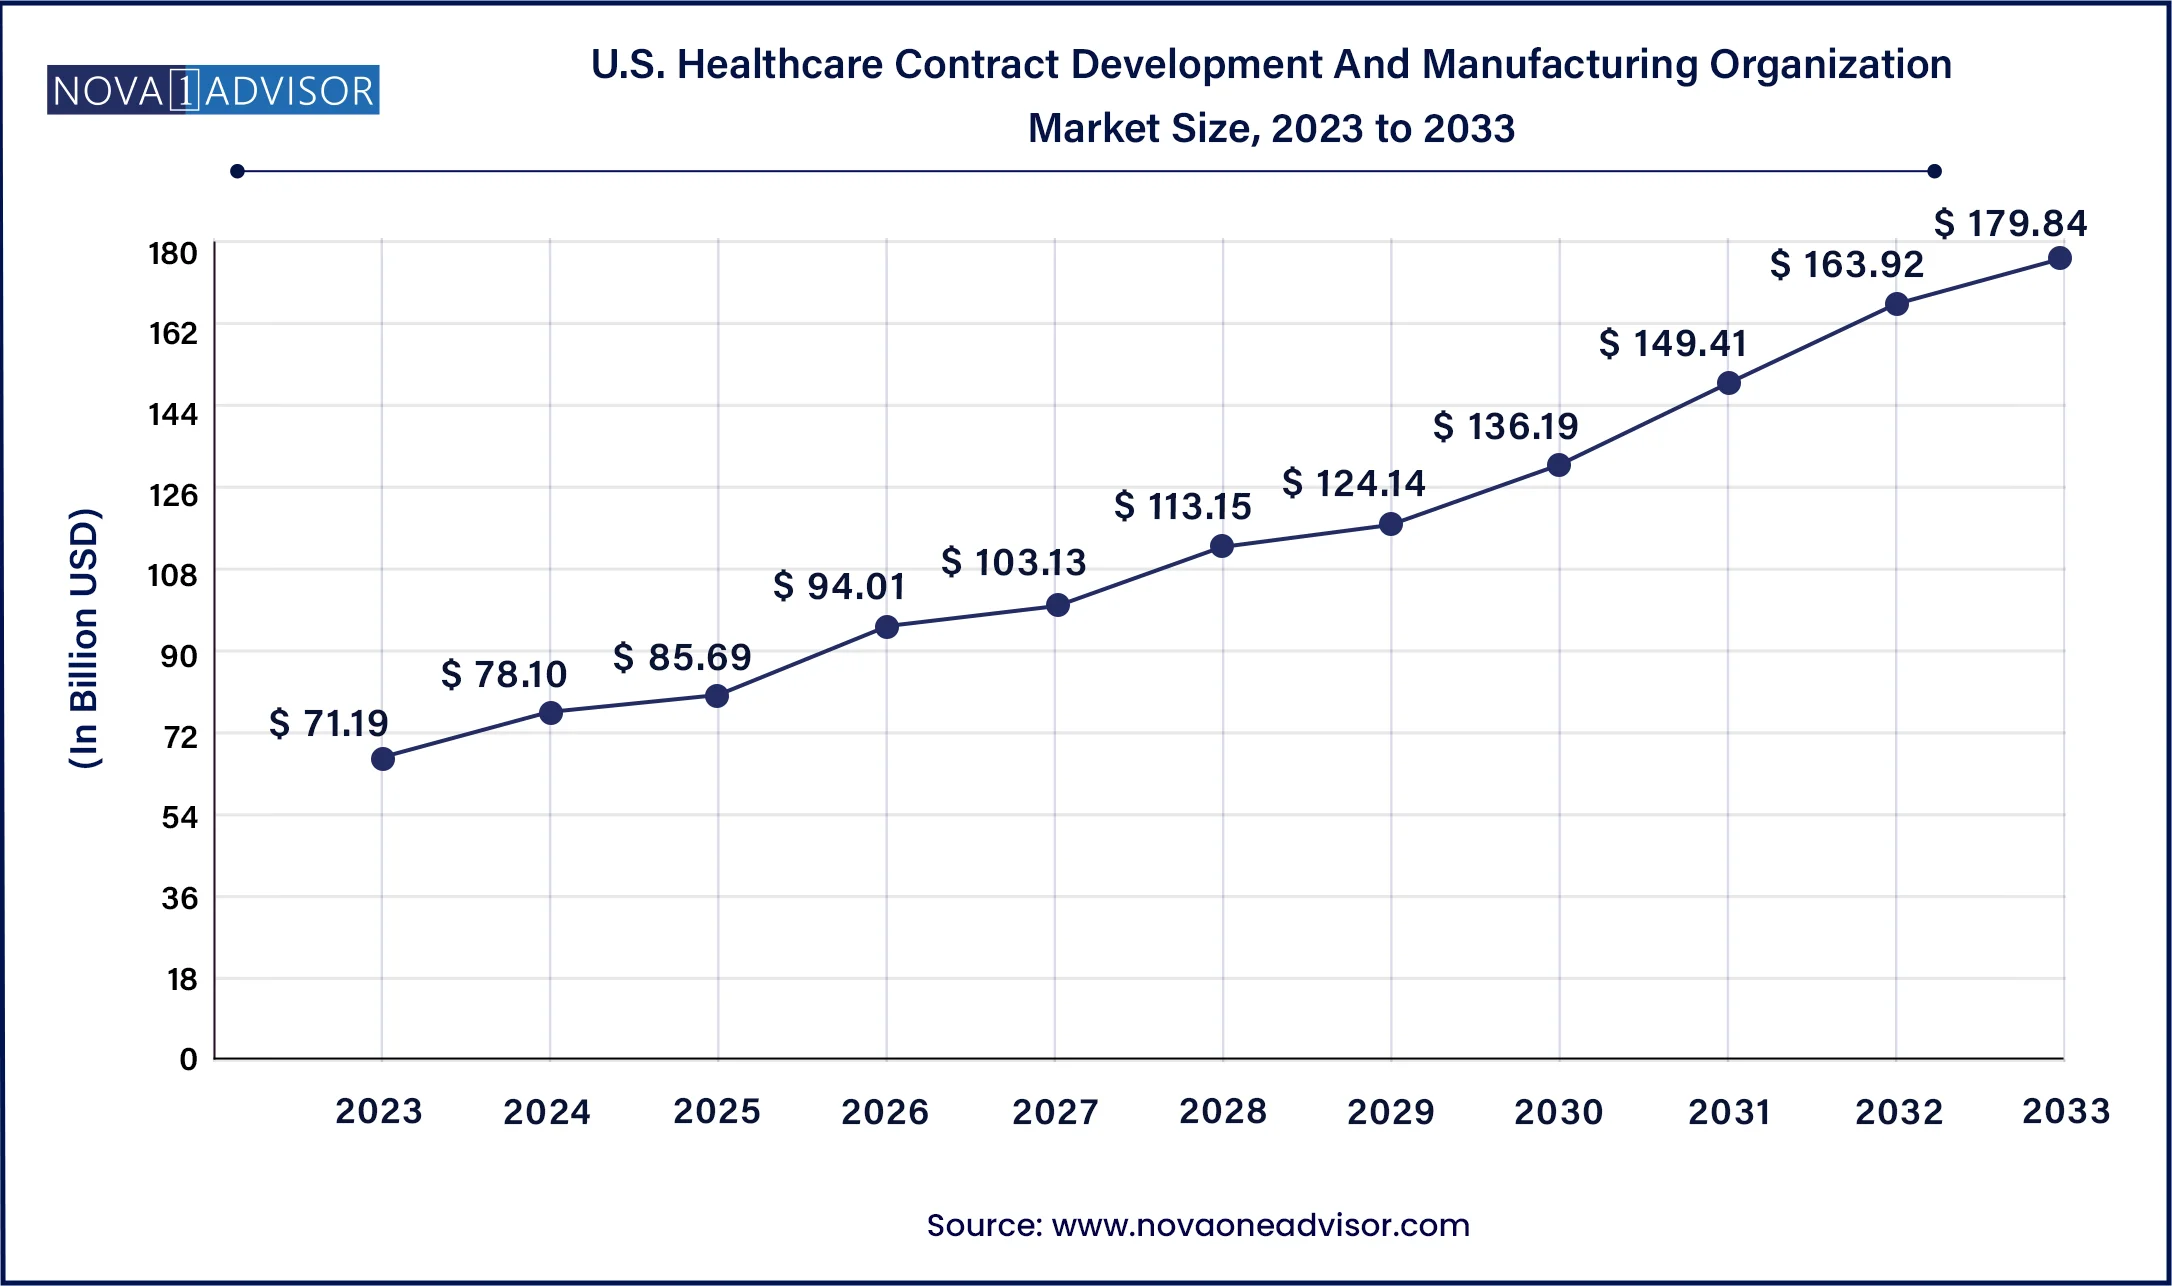 U.S. Healthcare Contract Development And Manufacturing Organization Market Size, 2024 to 2033